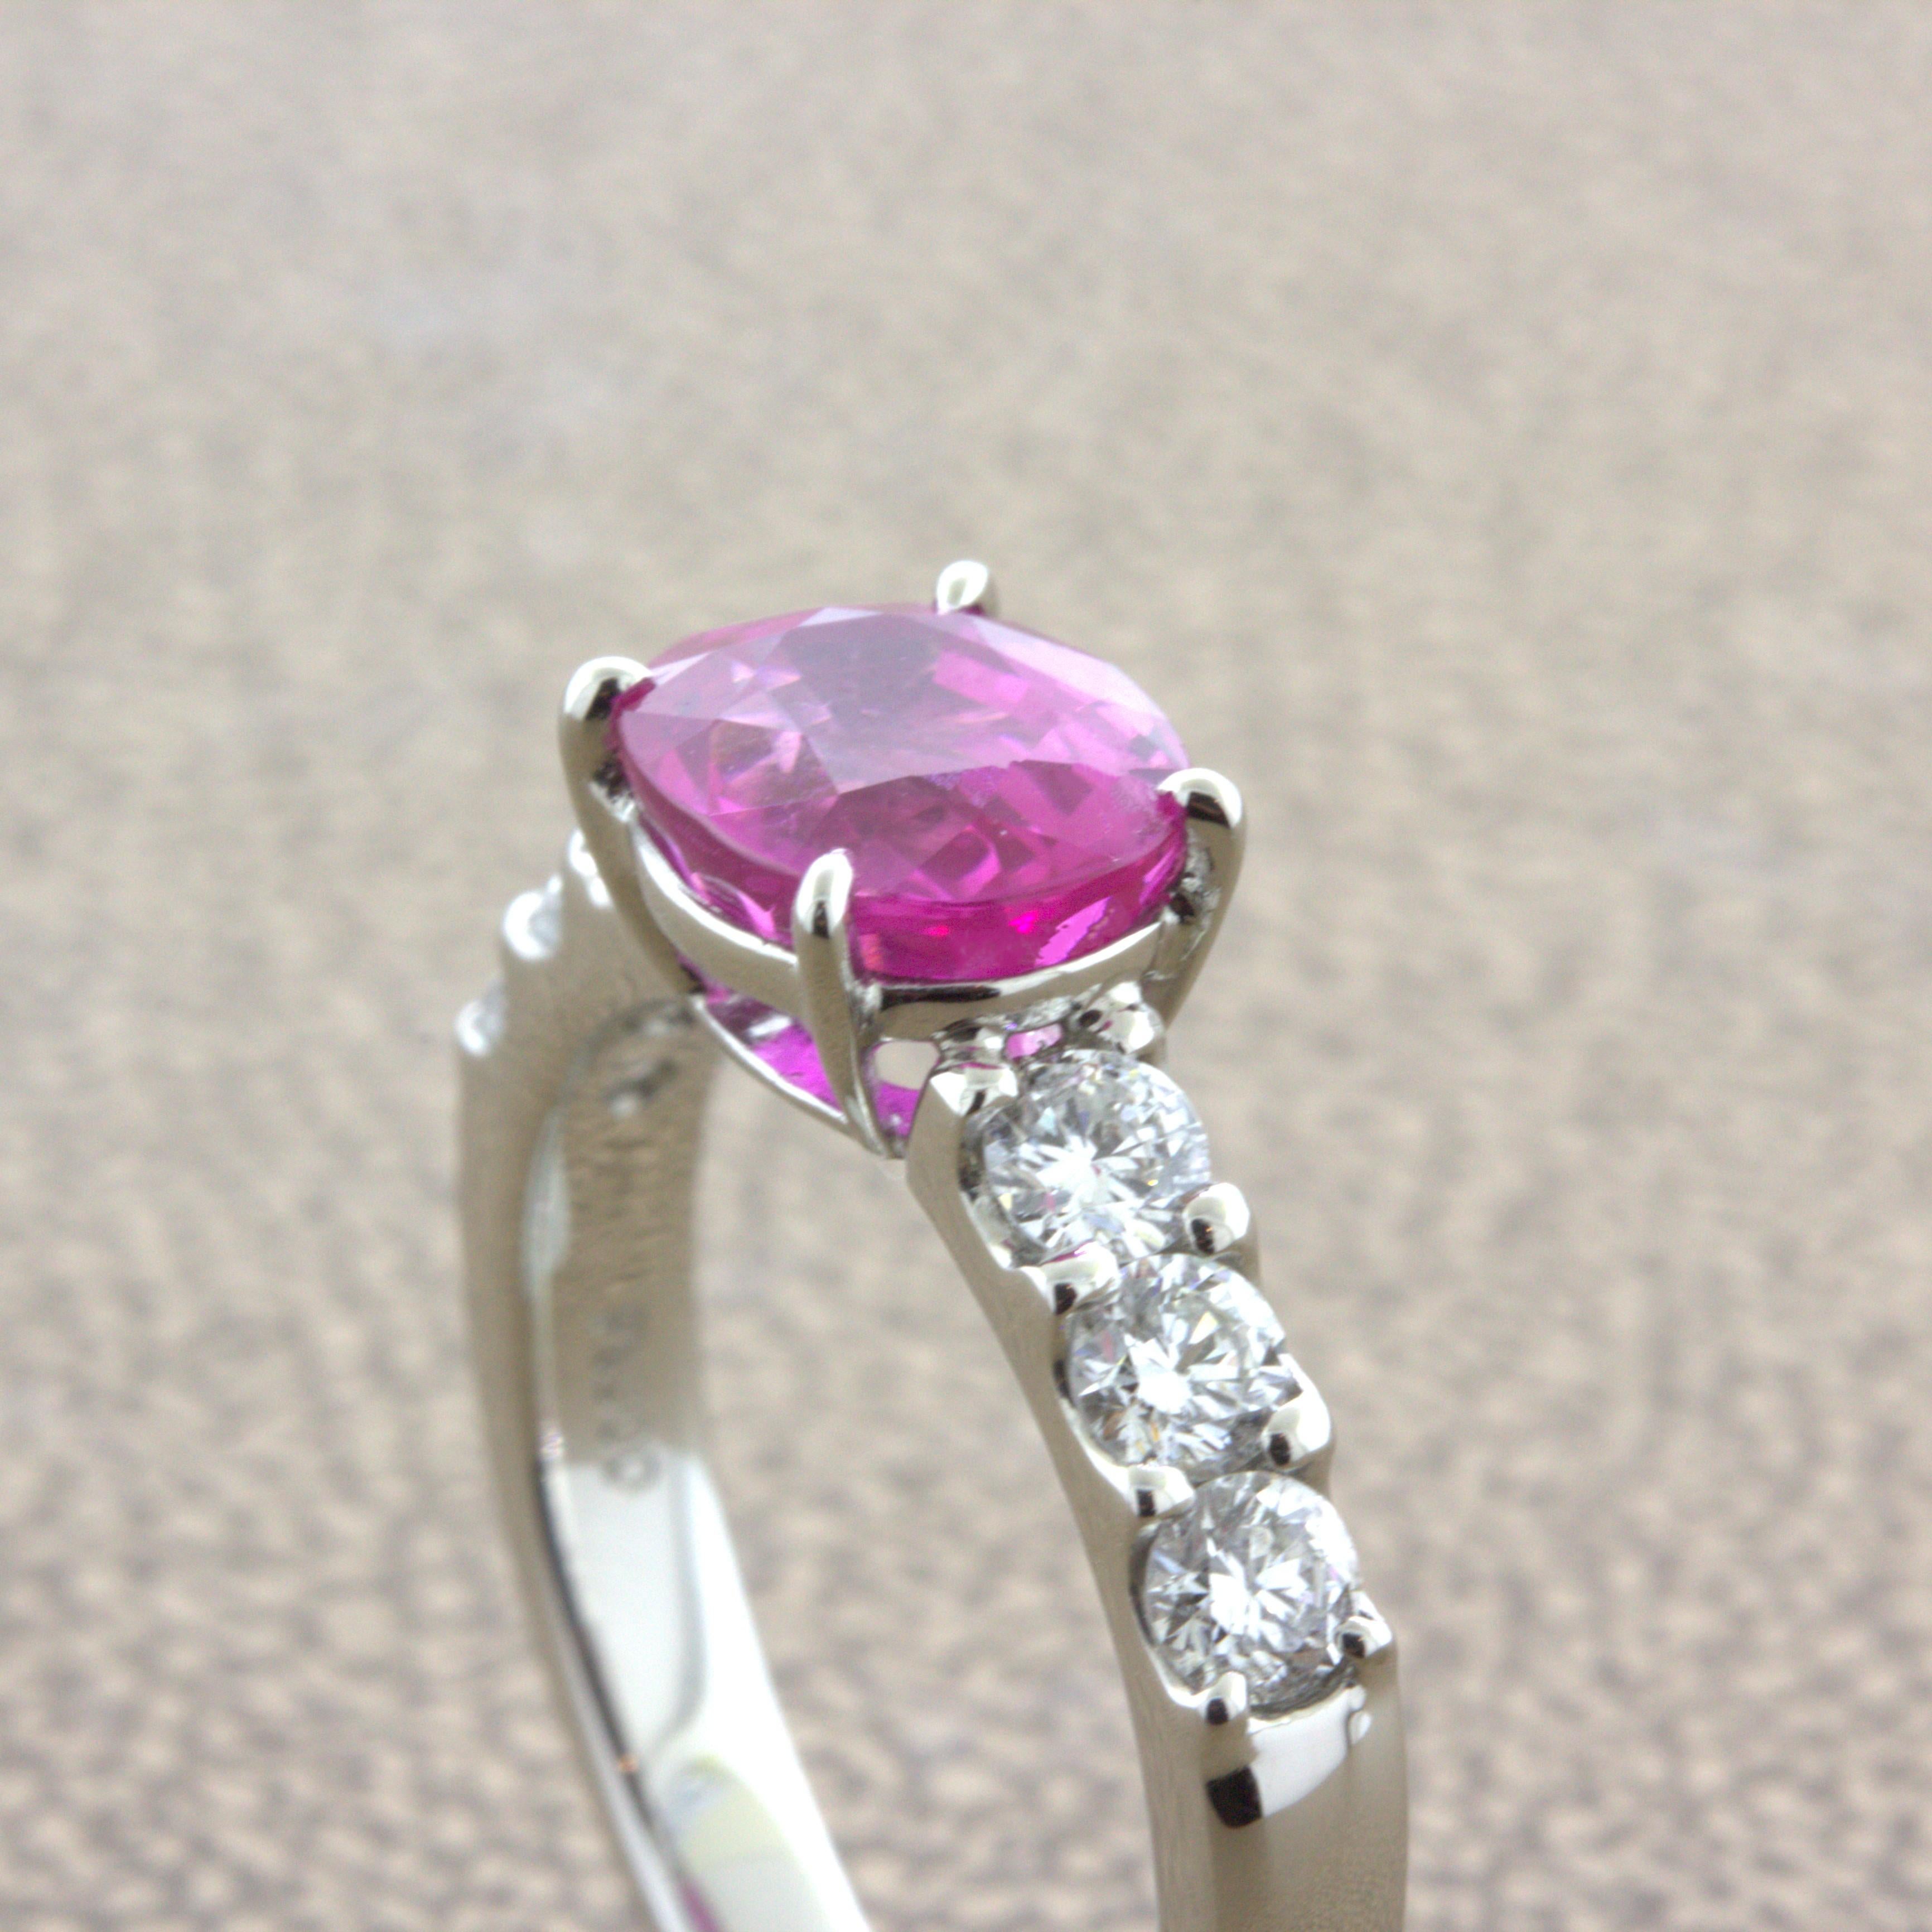 Exceptional 2.36 Carat Hot-Pink Sapphire Diamond Platinum Ring, GIA Certified For Sale 2